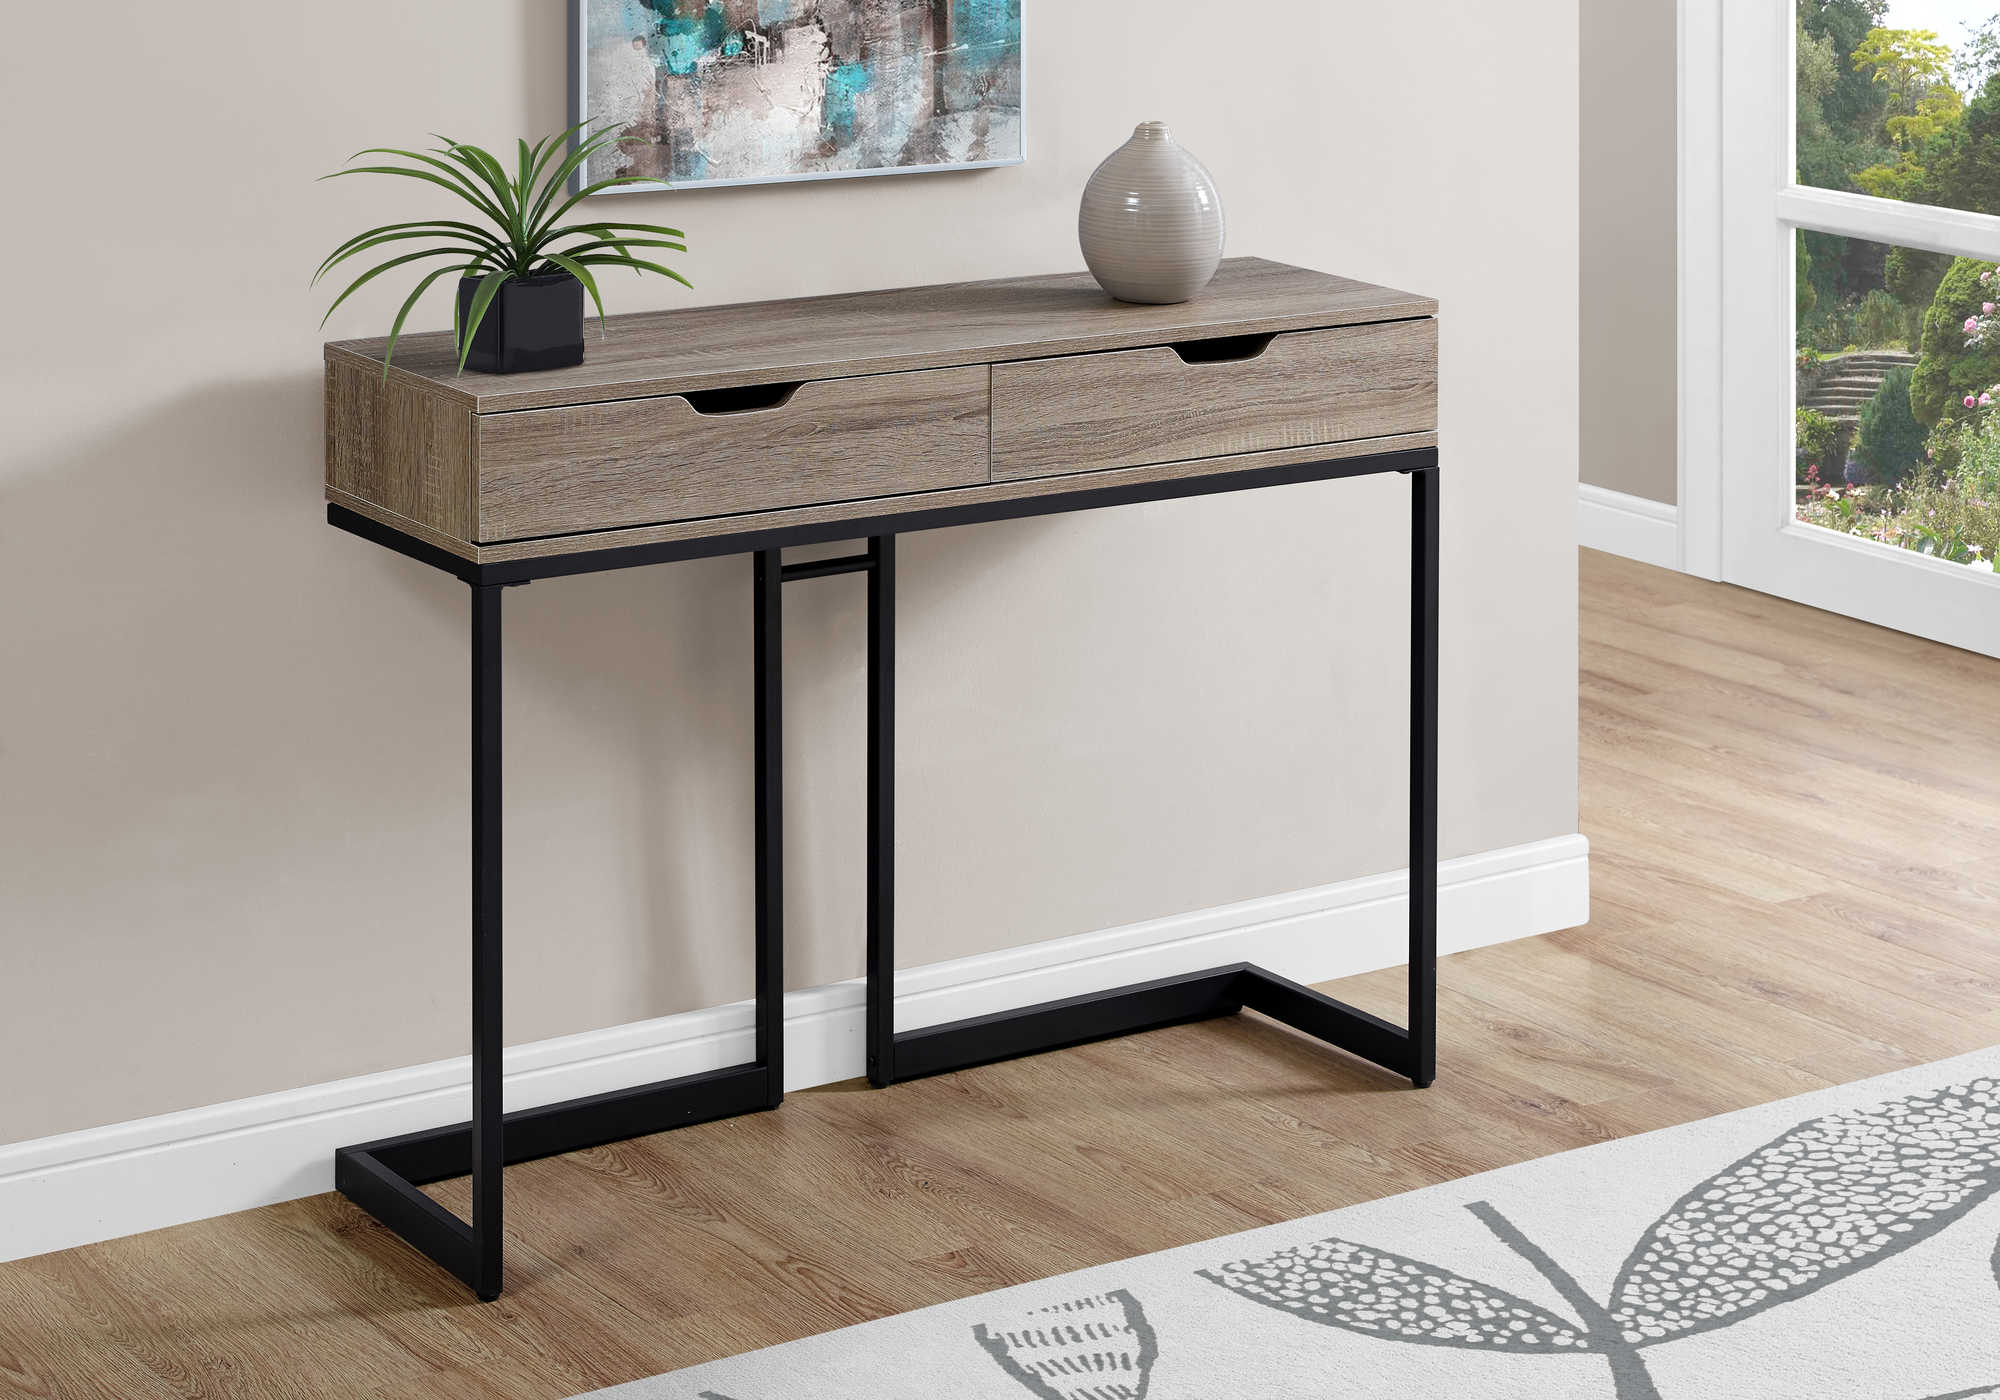 BEDROOM ACCENT CONSOLE TABLE - 42"L / DARK TAUPE / BLACK HALL CONSOLE